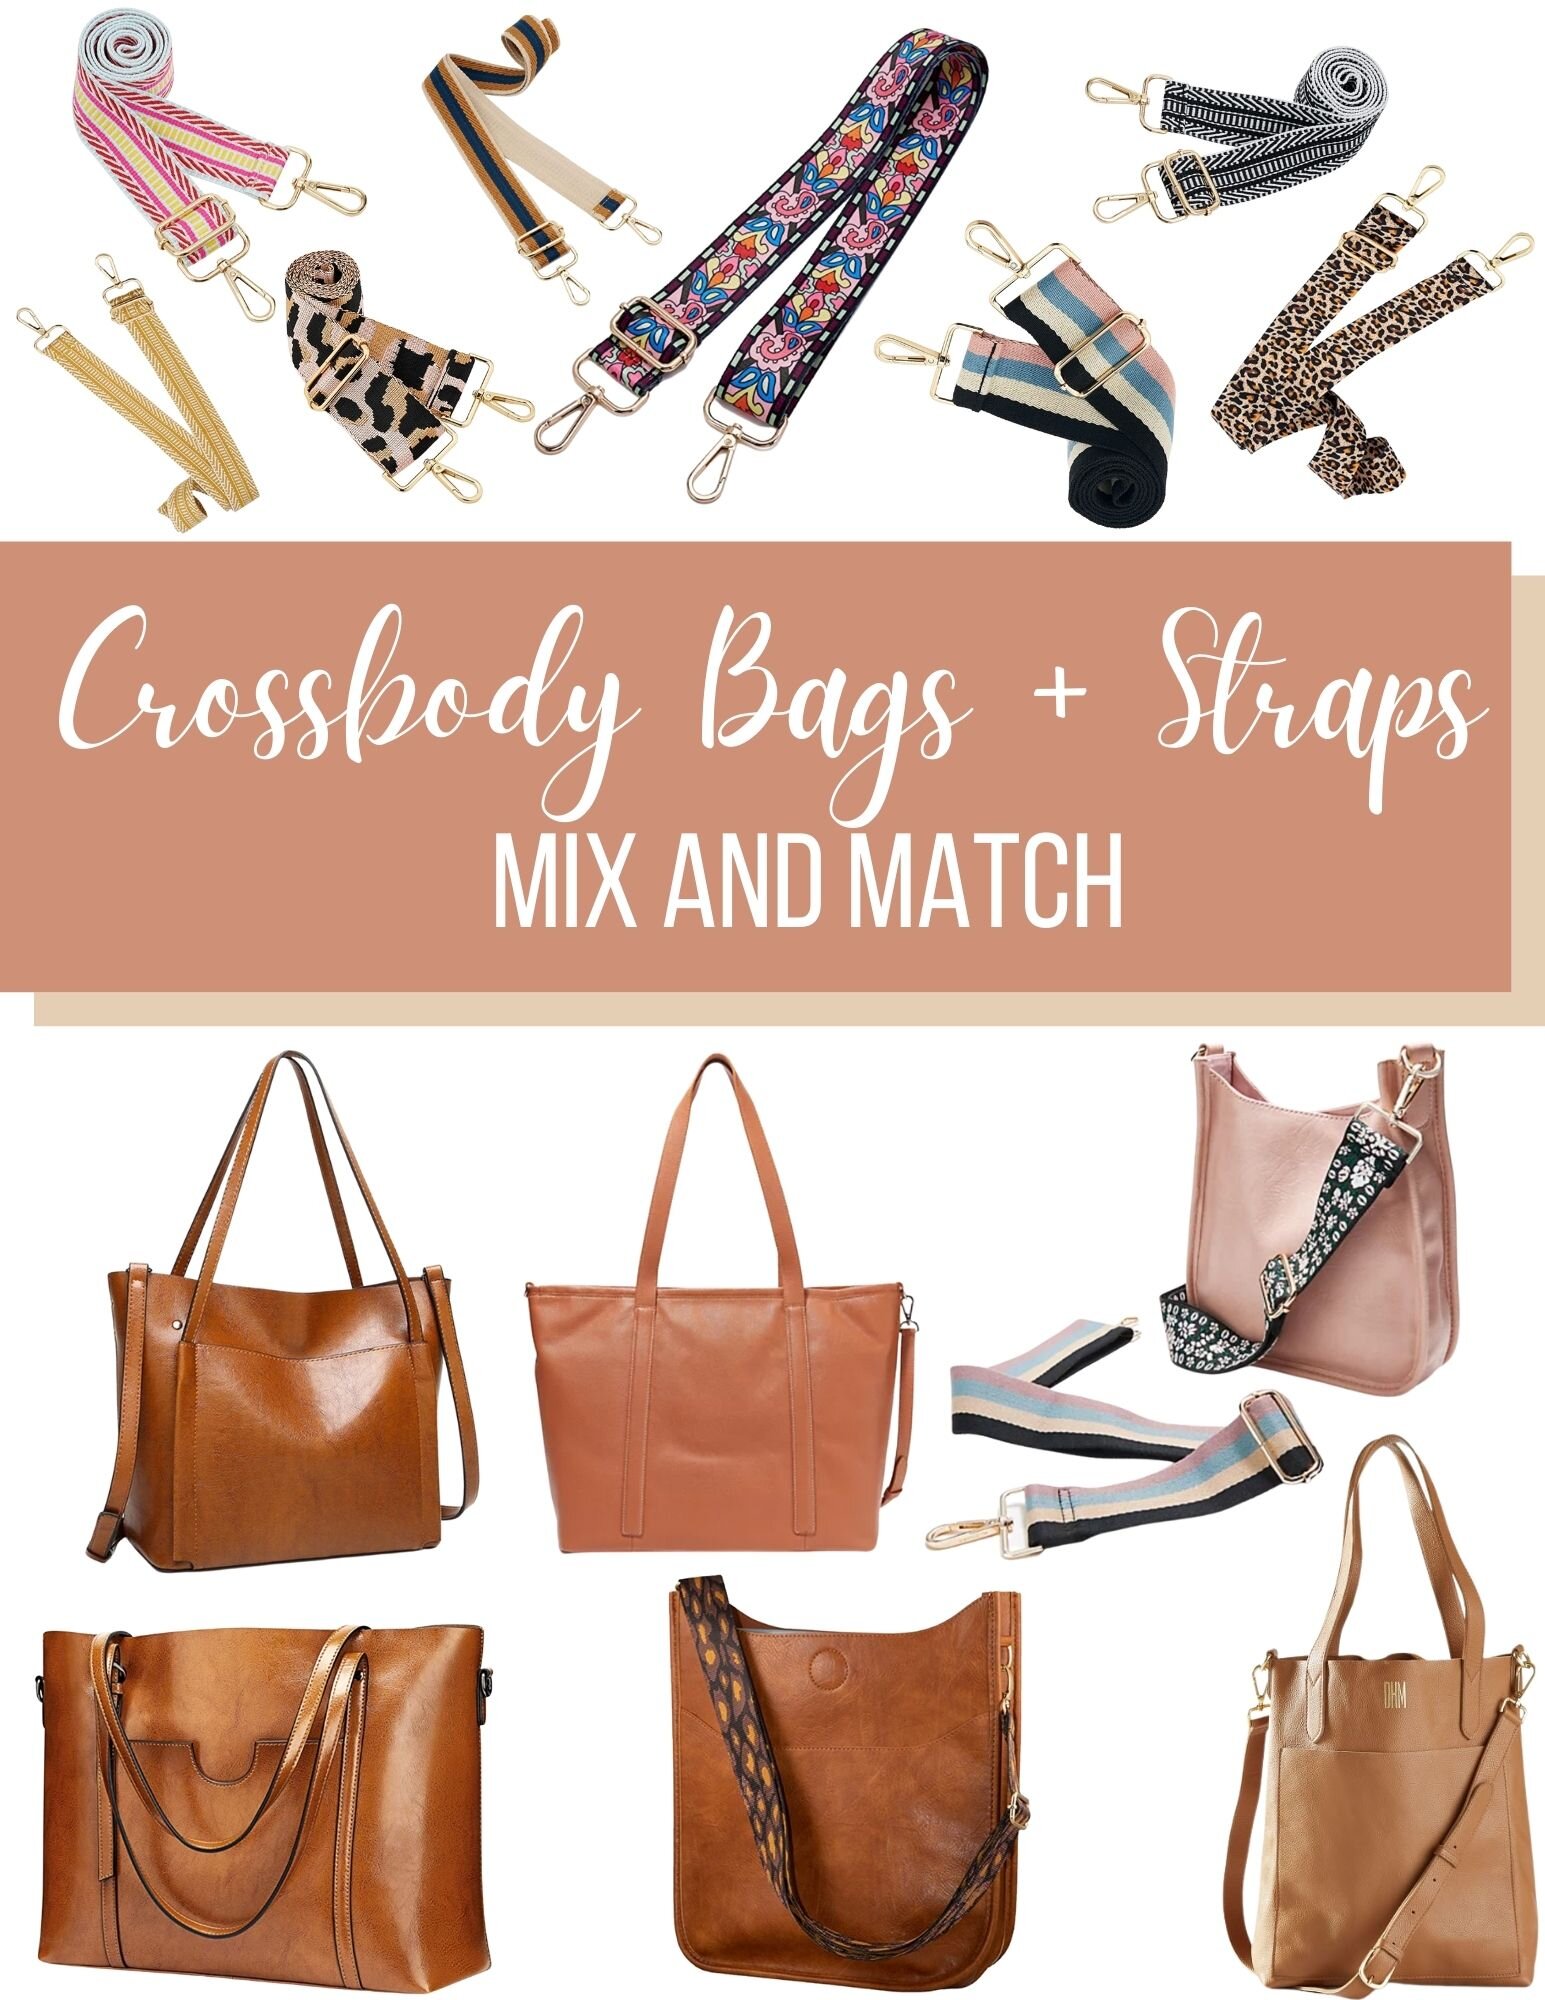 Crossbody Bags + Straps That You Can Mix and Match, H. Prall